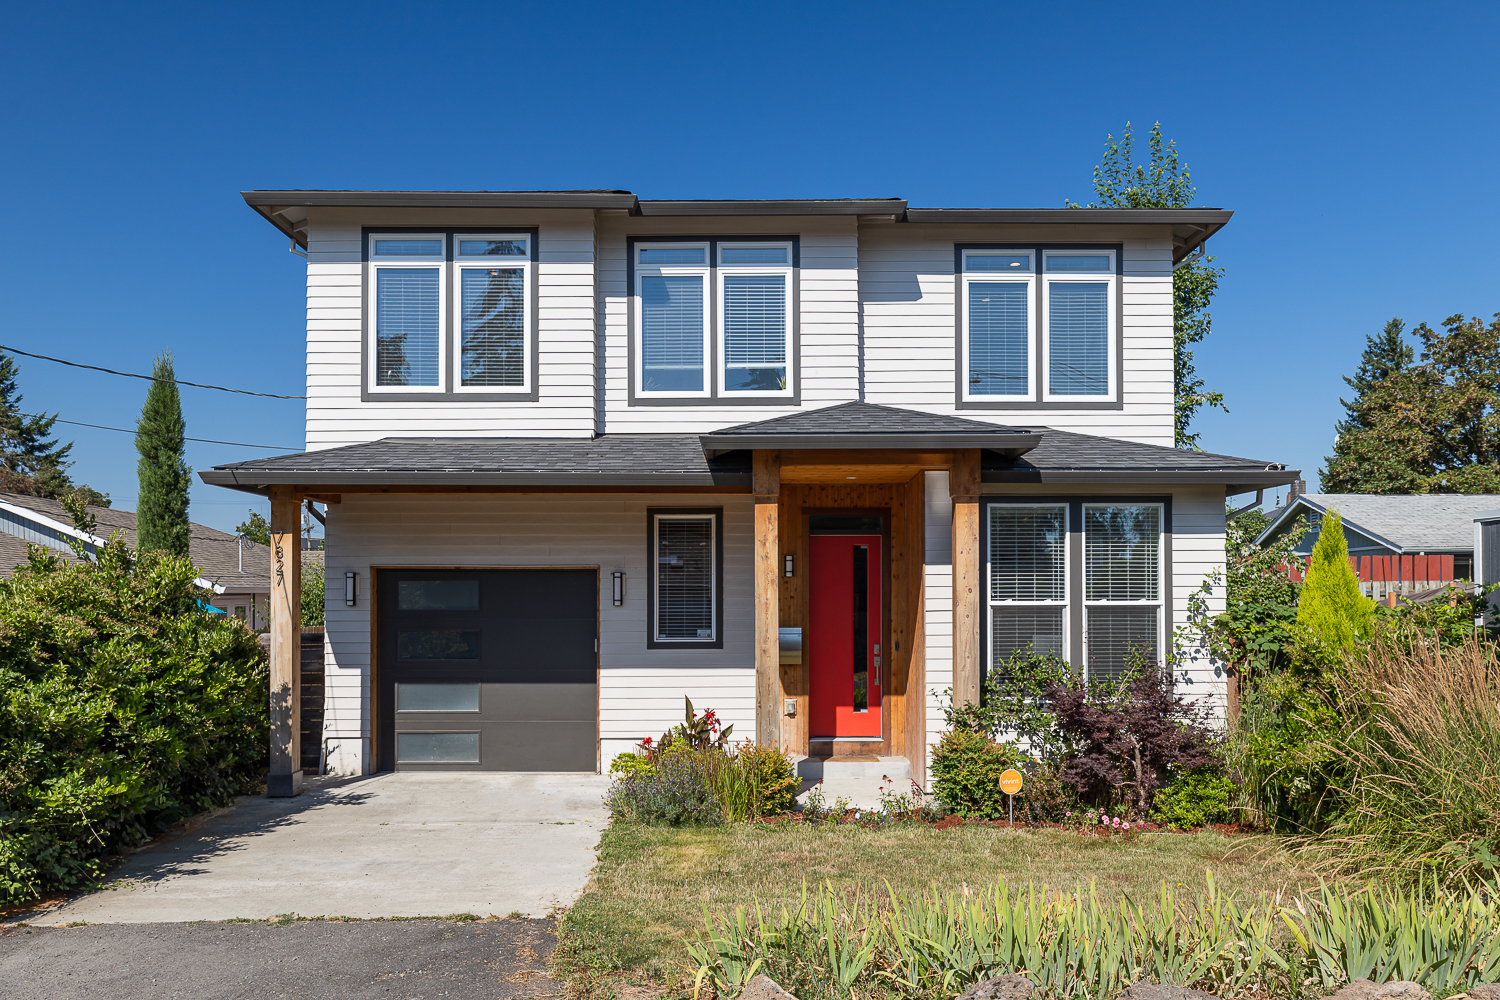 Now Available! 7827 SE 54th Ave., Portland 97206 Offered for $749,000